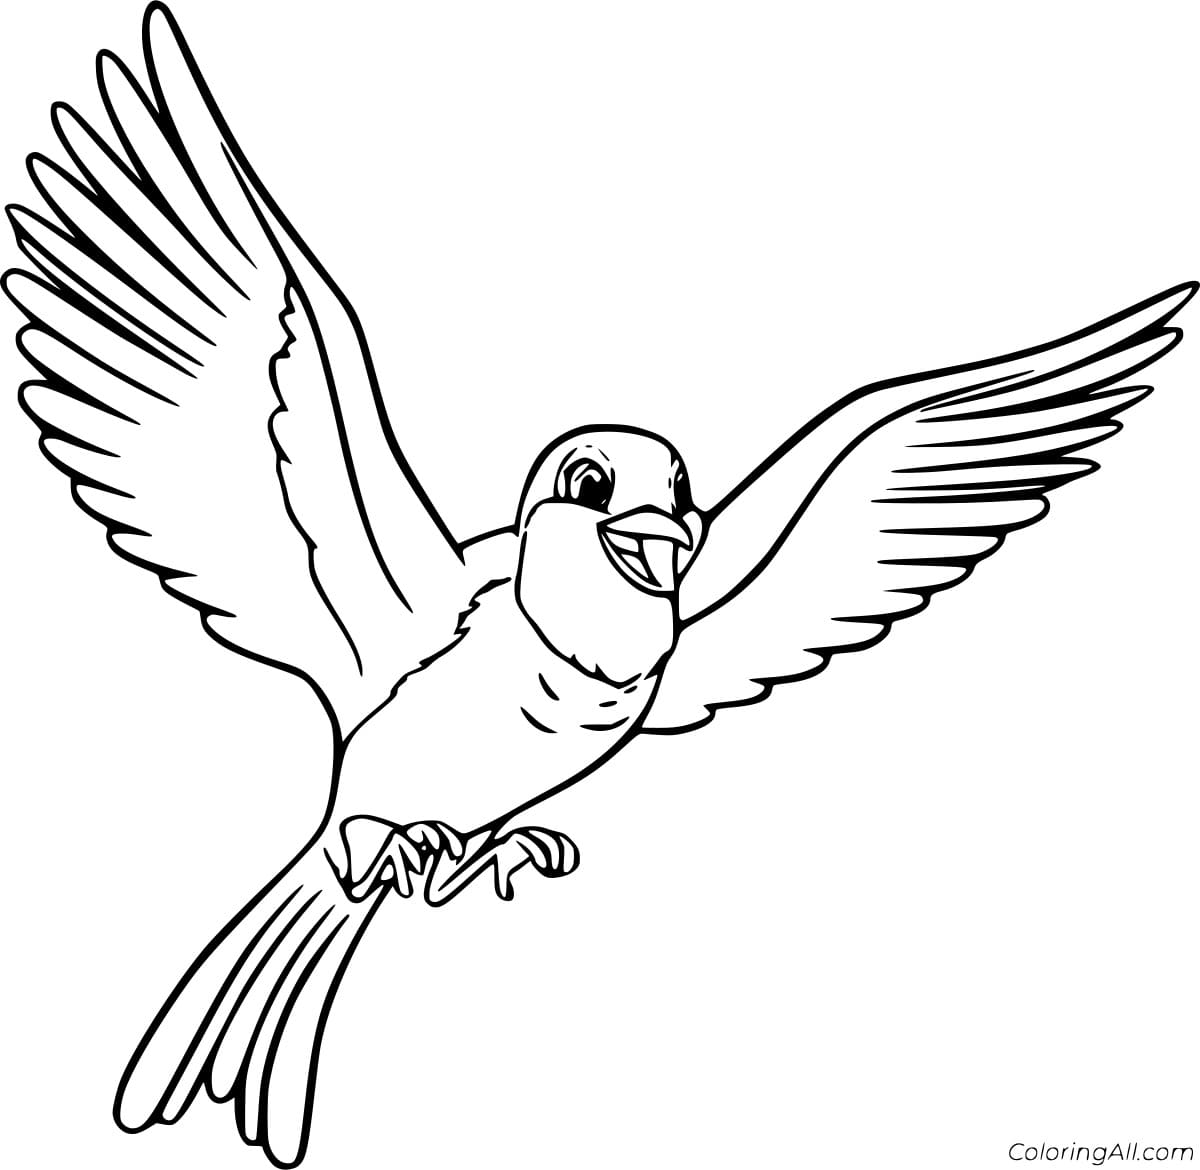 Cute Flying Robin Coloring Page